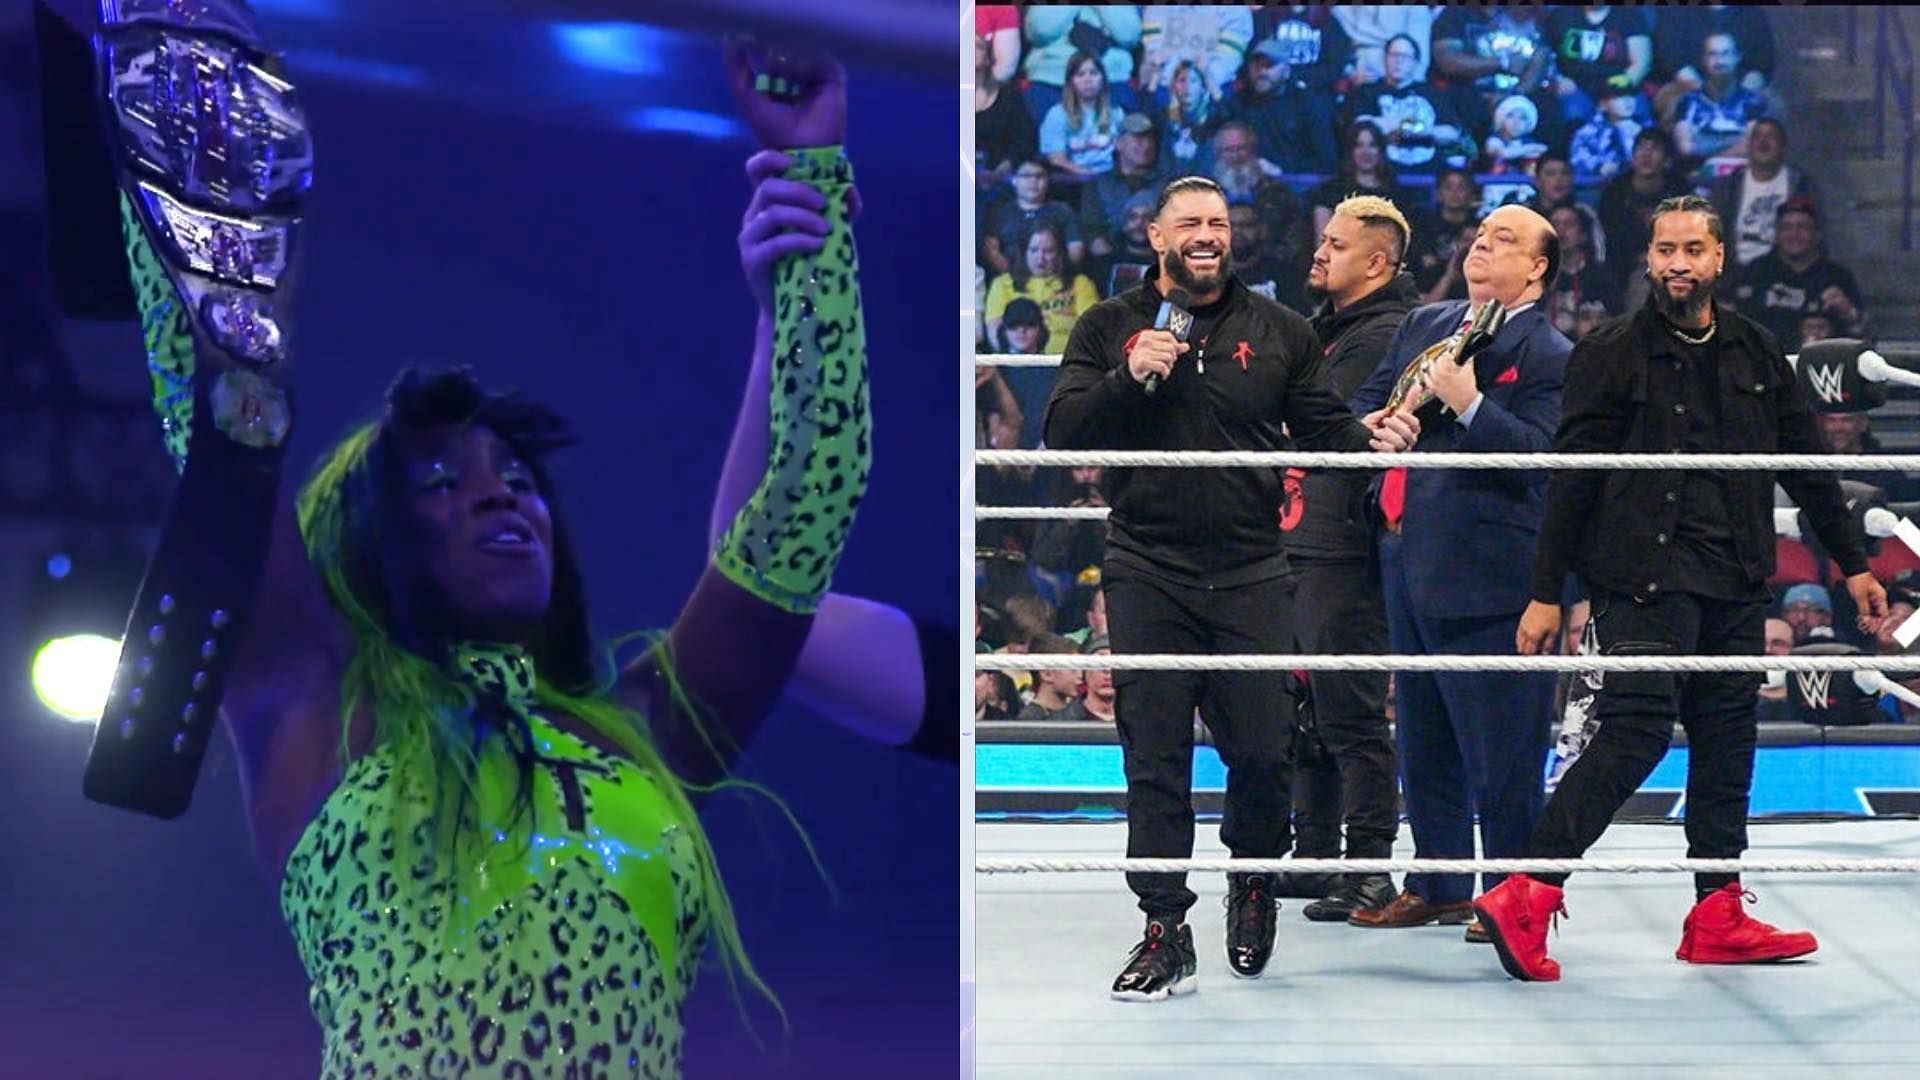 Naomi could potentially be returning to WWE in the future